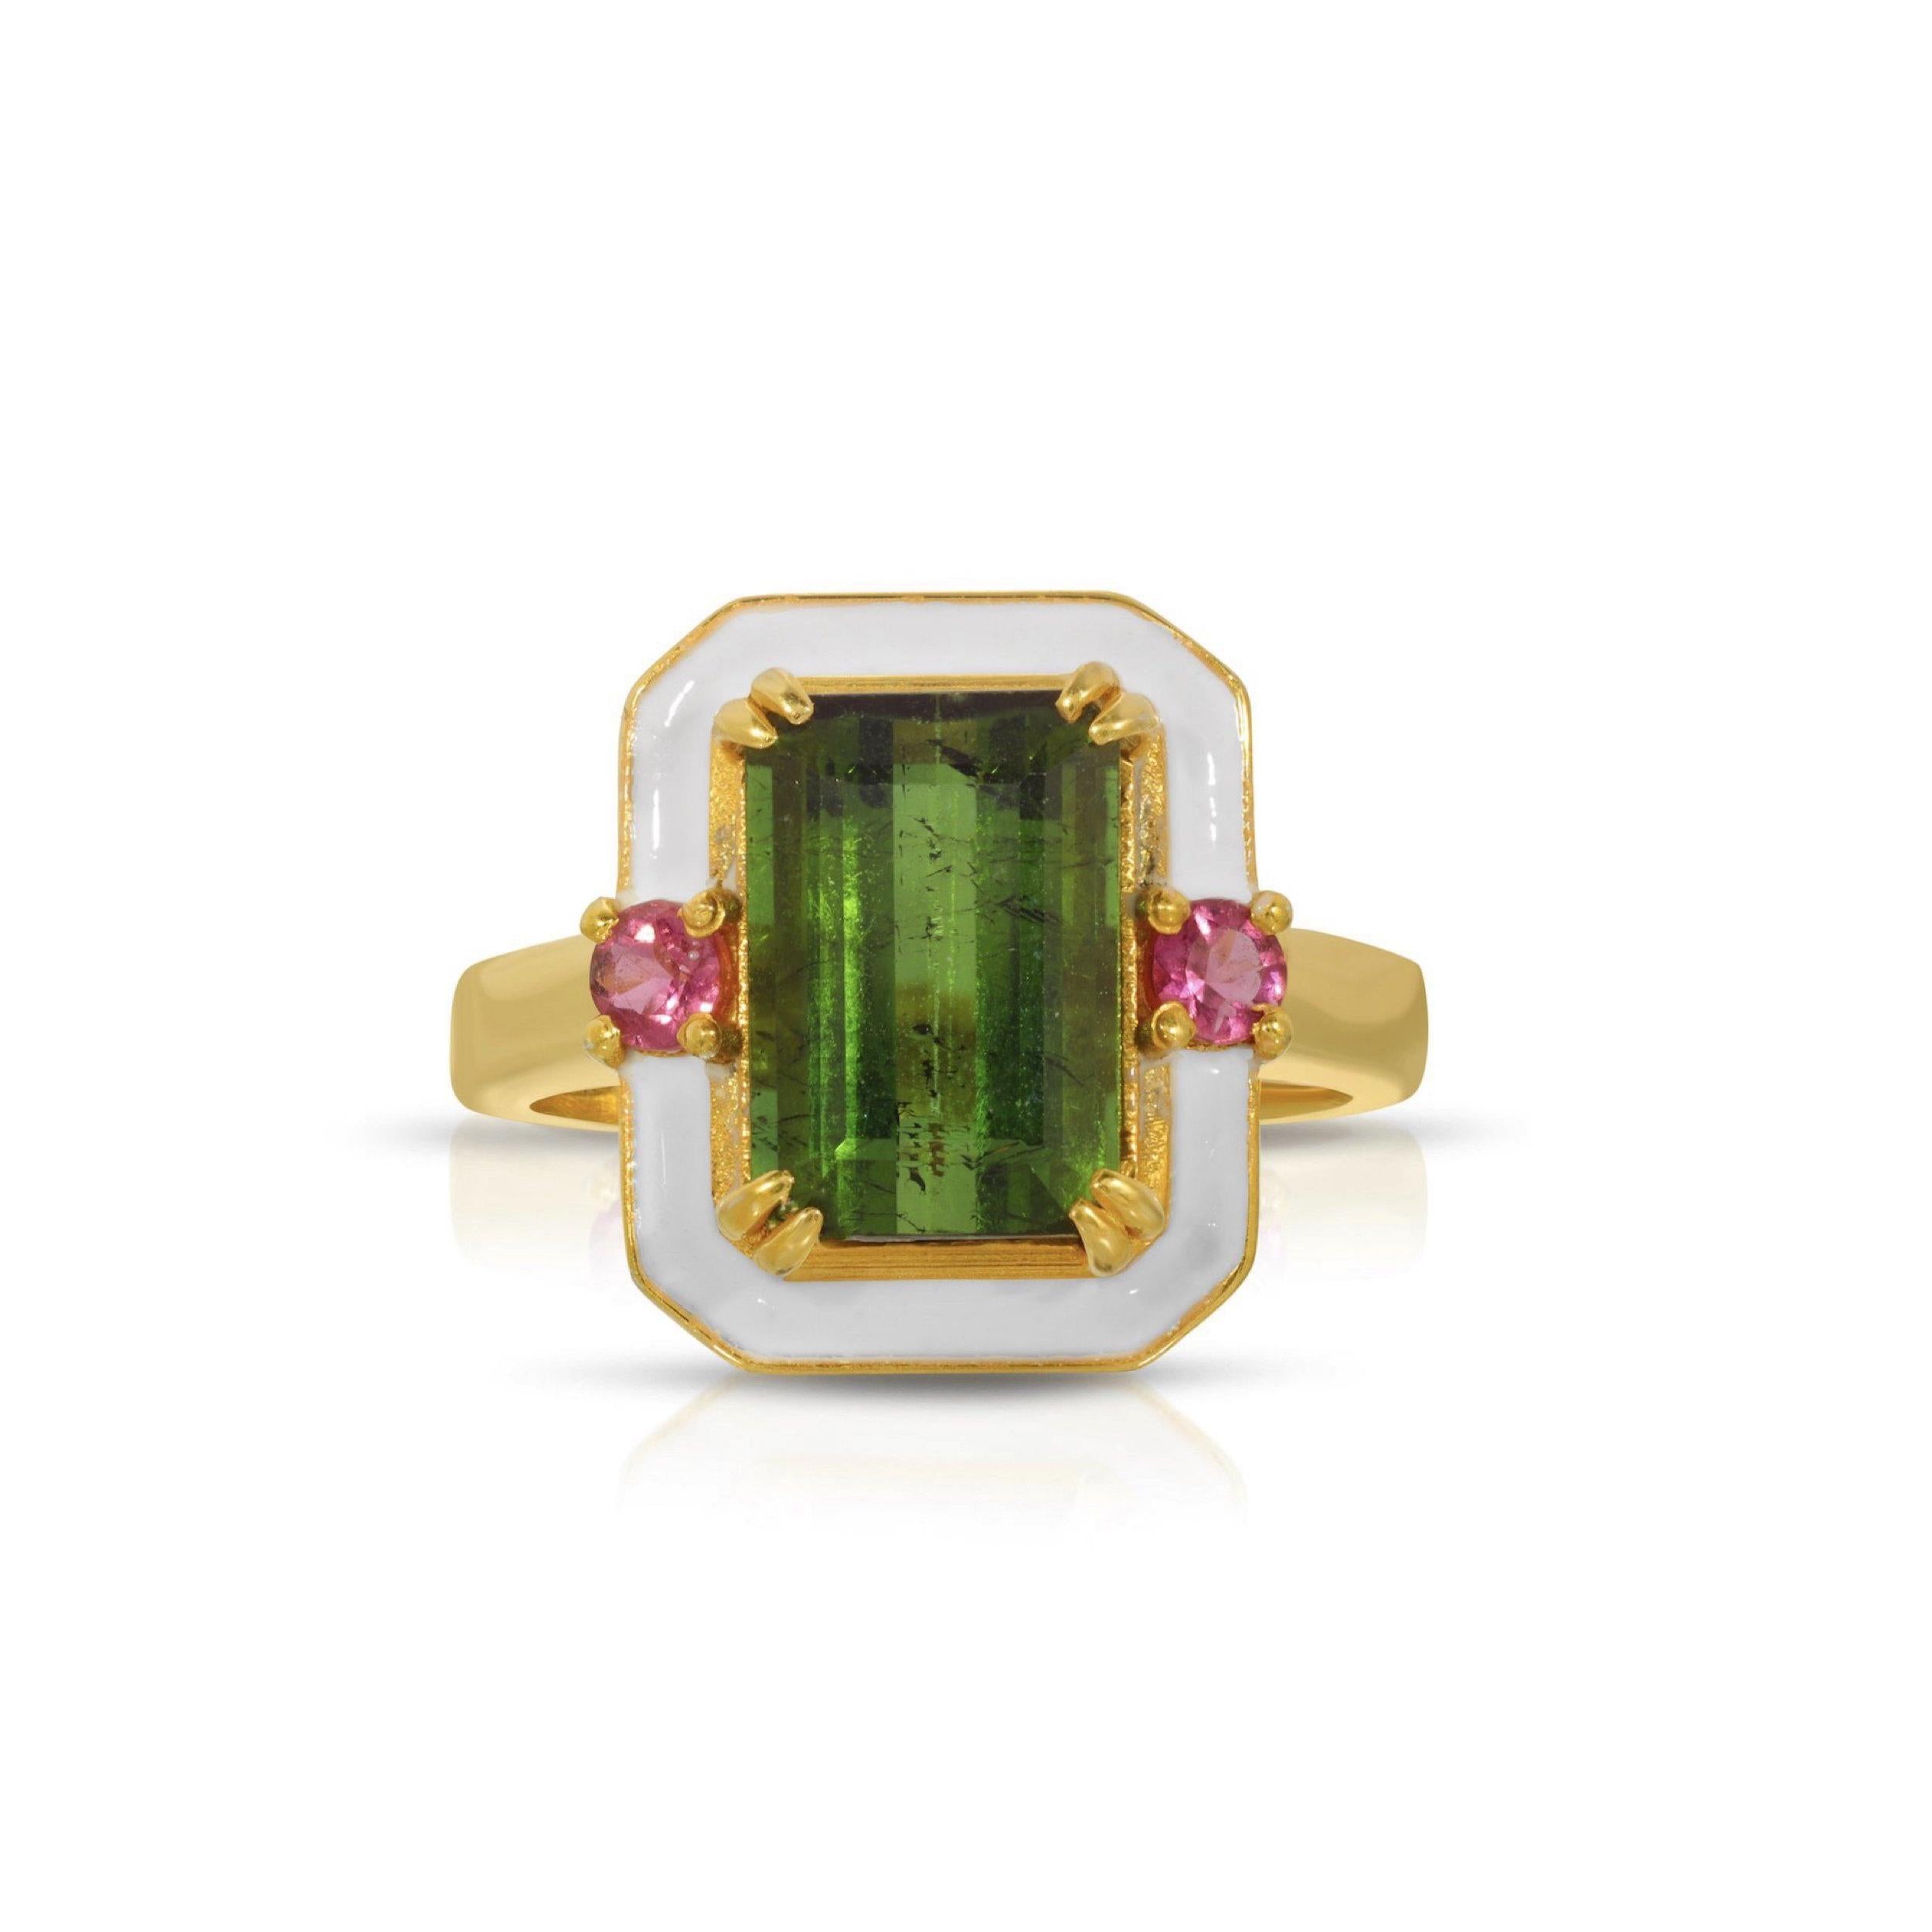 A beautiful cocktail ring of modern design with mixed-cut Tourmalines and enamel. This gorgeous ring features an alluring emerald cut Dark Green Tourmaline center stone set with two round cut fiery Pink Tourmalines and glossy white enamel. This ring